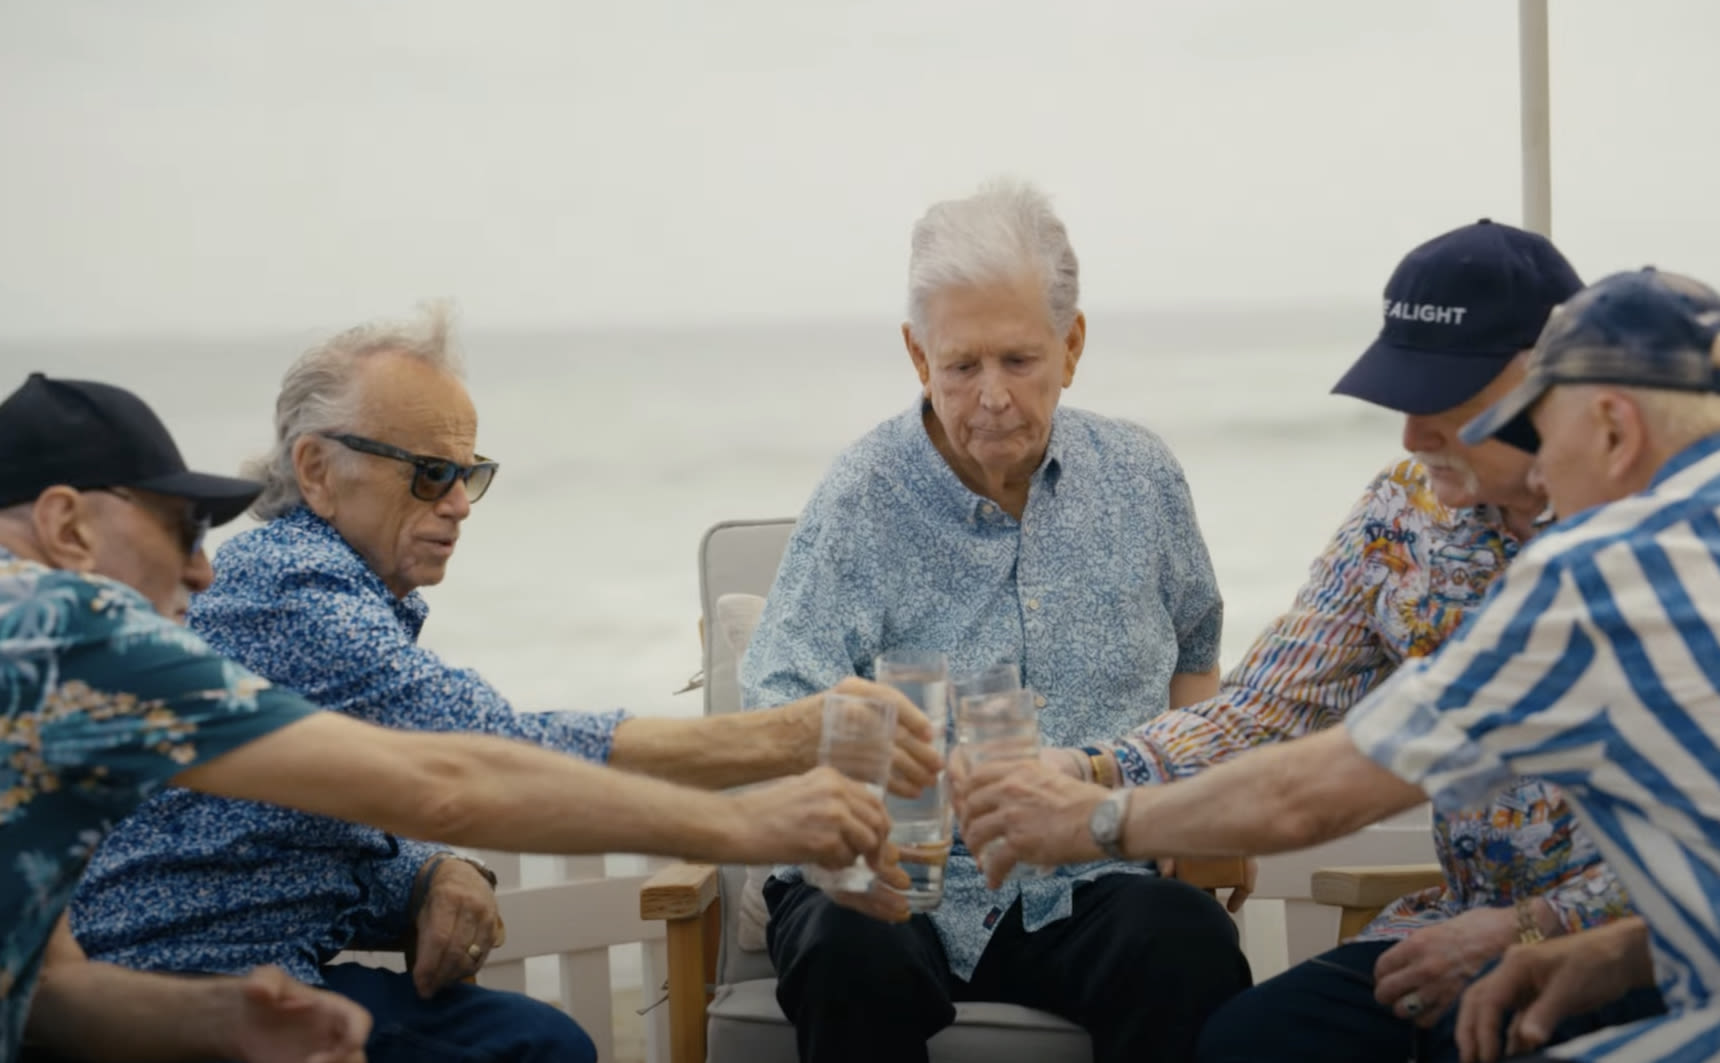 The Beach Boys Hold ‘Family Reunion’ at ‘Surfin’ Safari’ Spot in Clip From Band’s Documentary